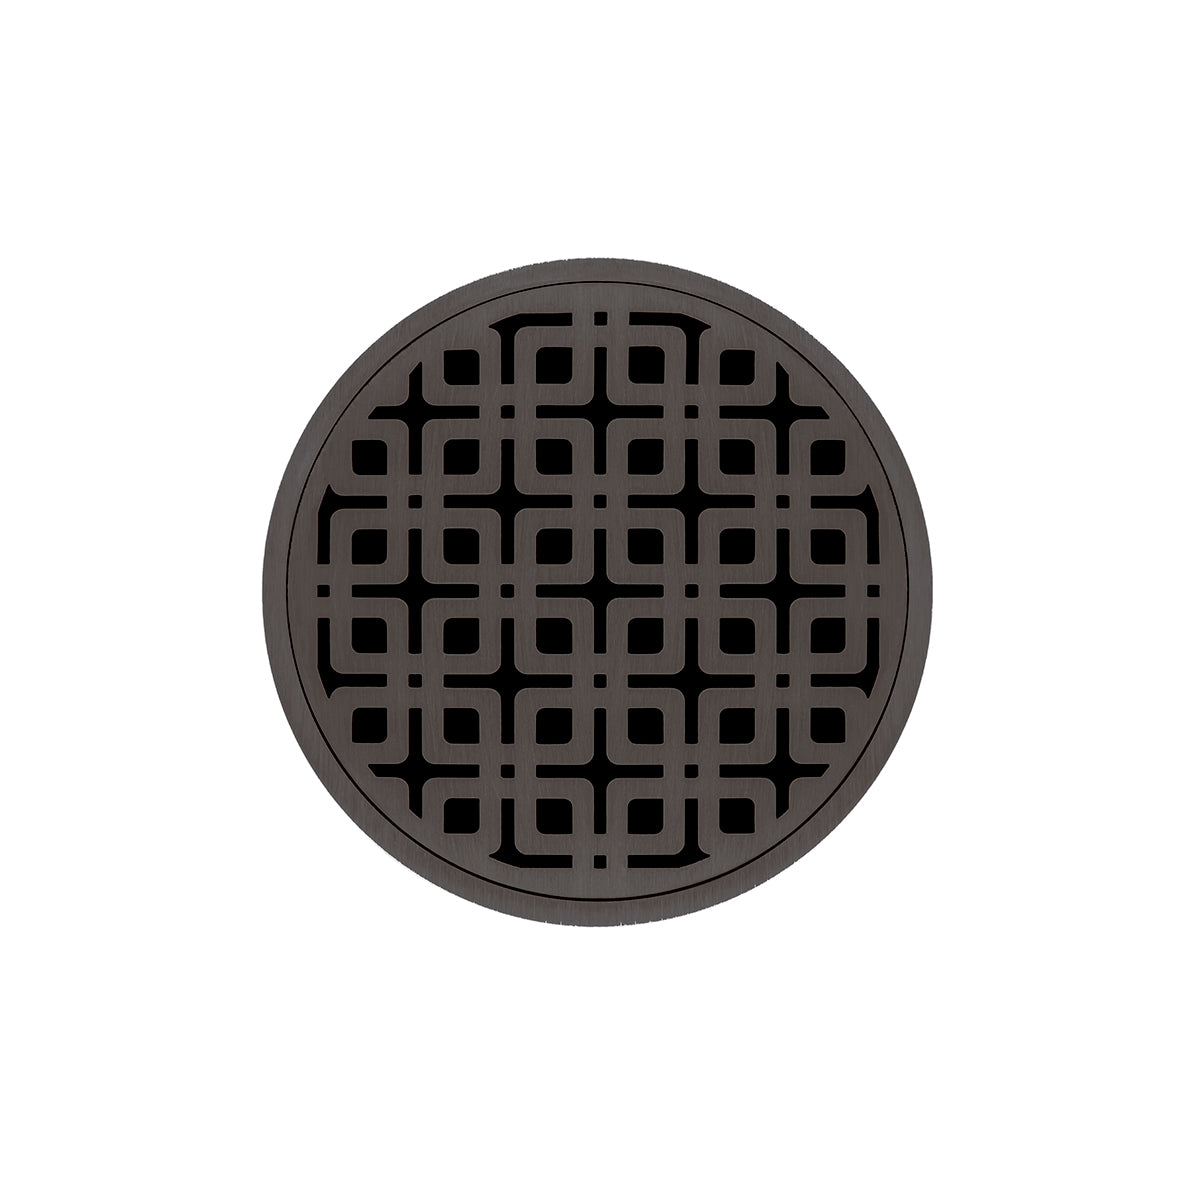 Infinity Drain 5" Round RKD 5 High Flow Premium Center Drain Kit with Link Pattern Decorative Plate with Cast Iron Drain Body, 3" No-Hub Outlet